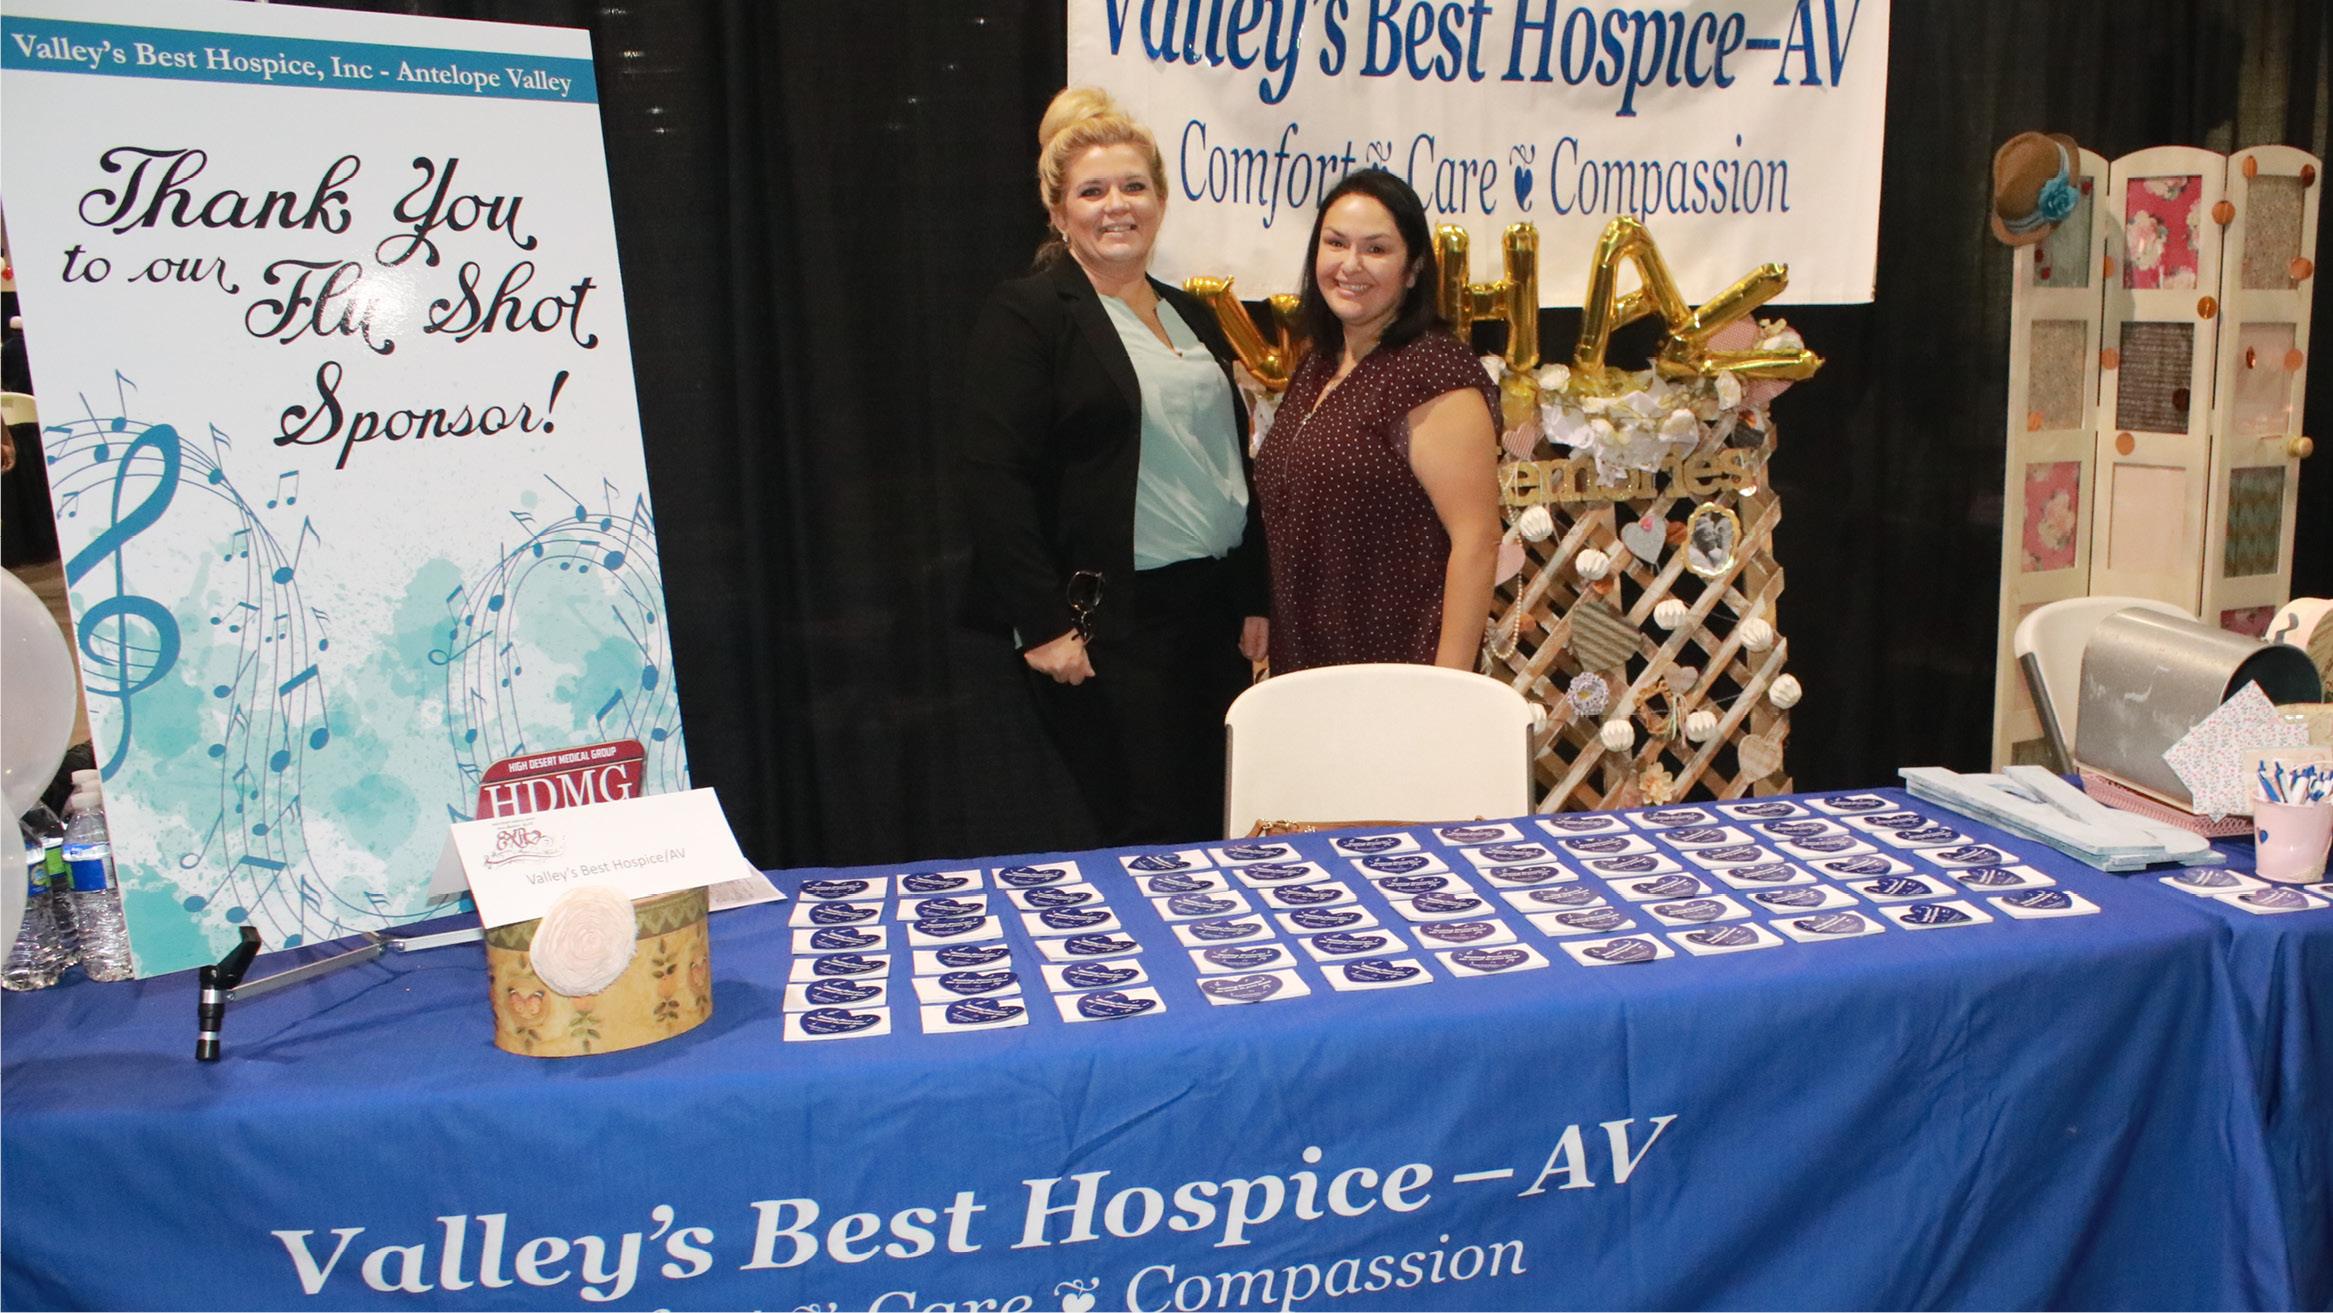 Valley's Best Hospice booth